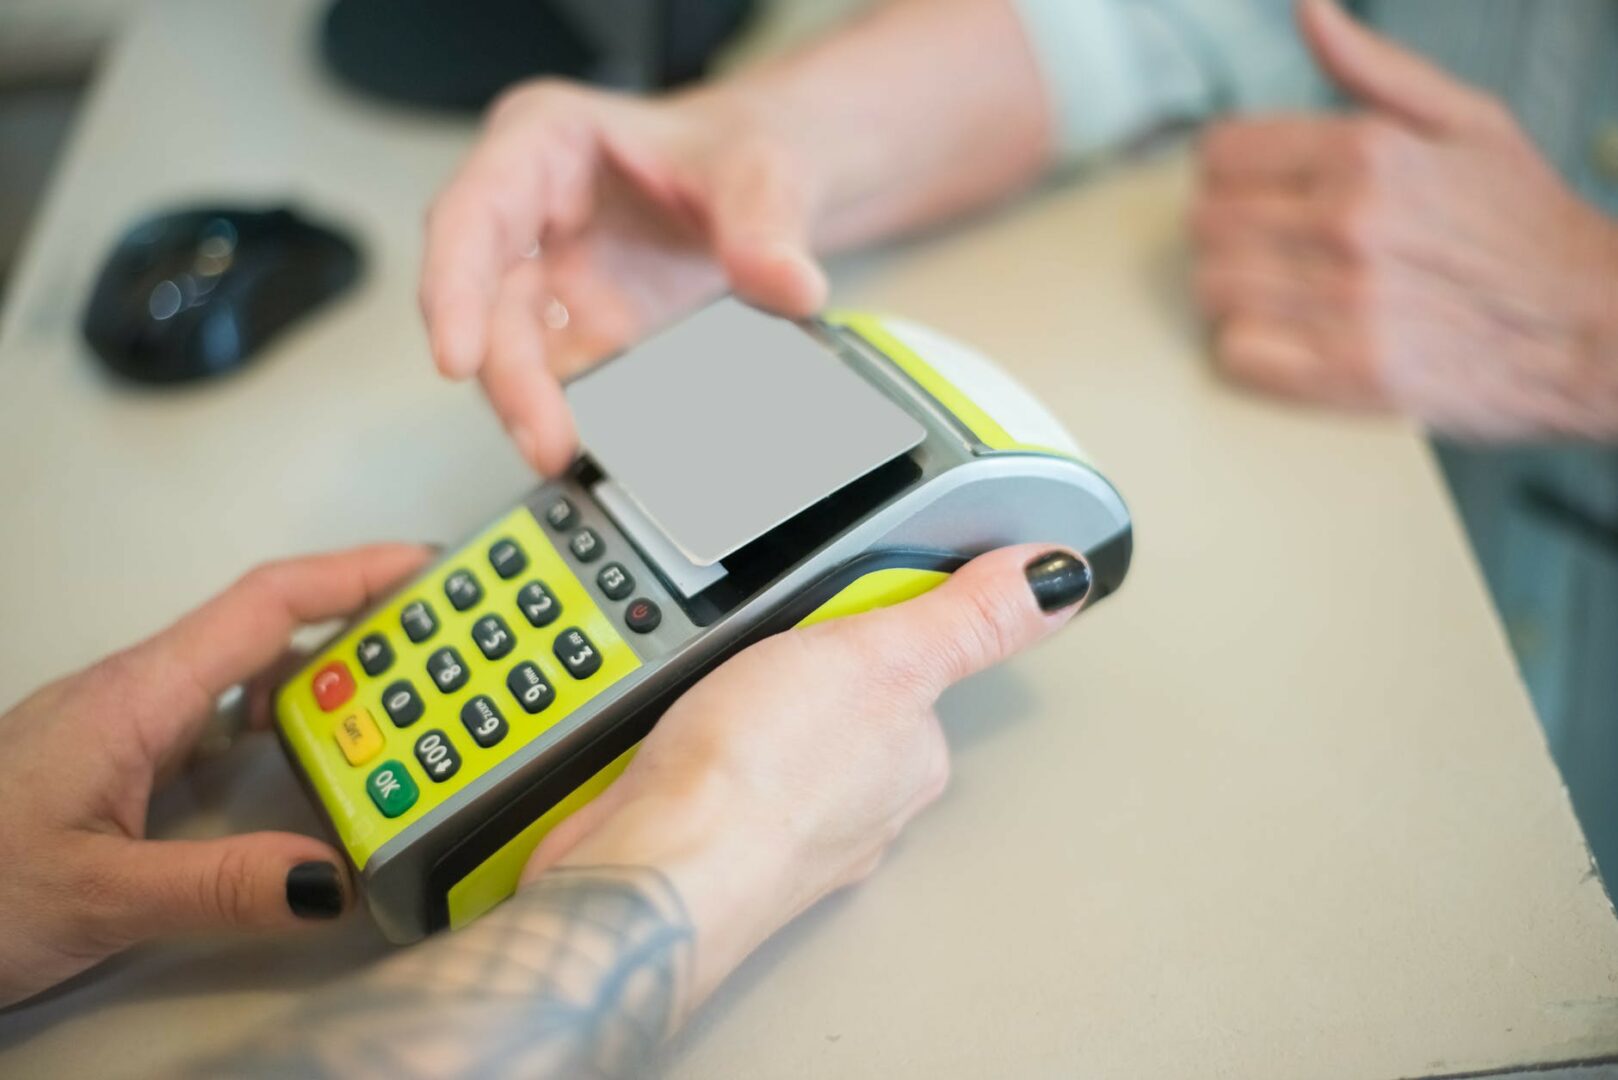 Paymark digital interface - a reliable online EFTPOS payment system being used in Auckland.